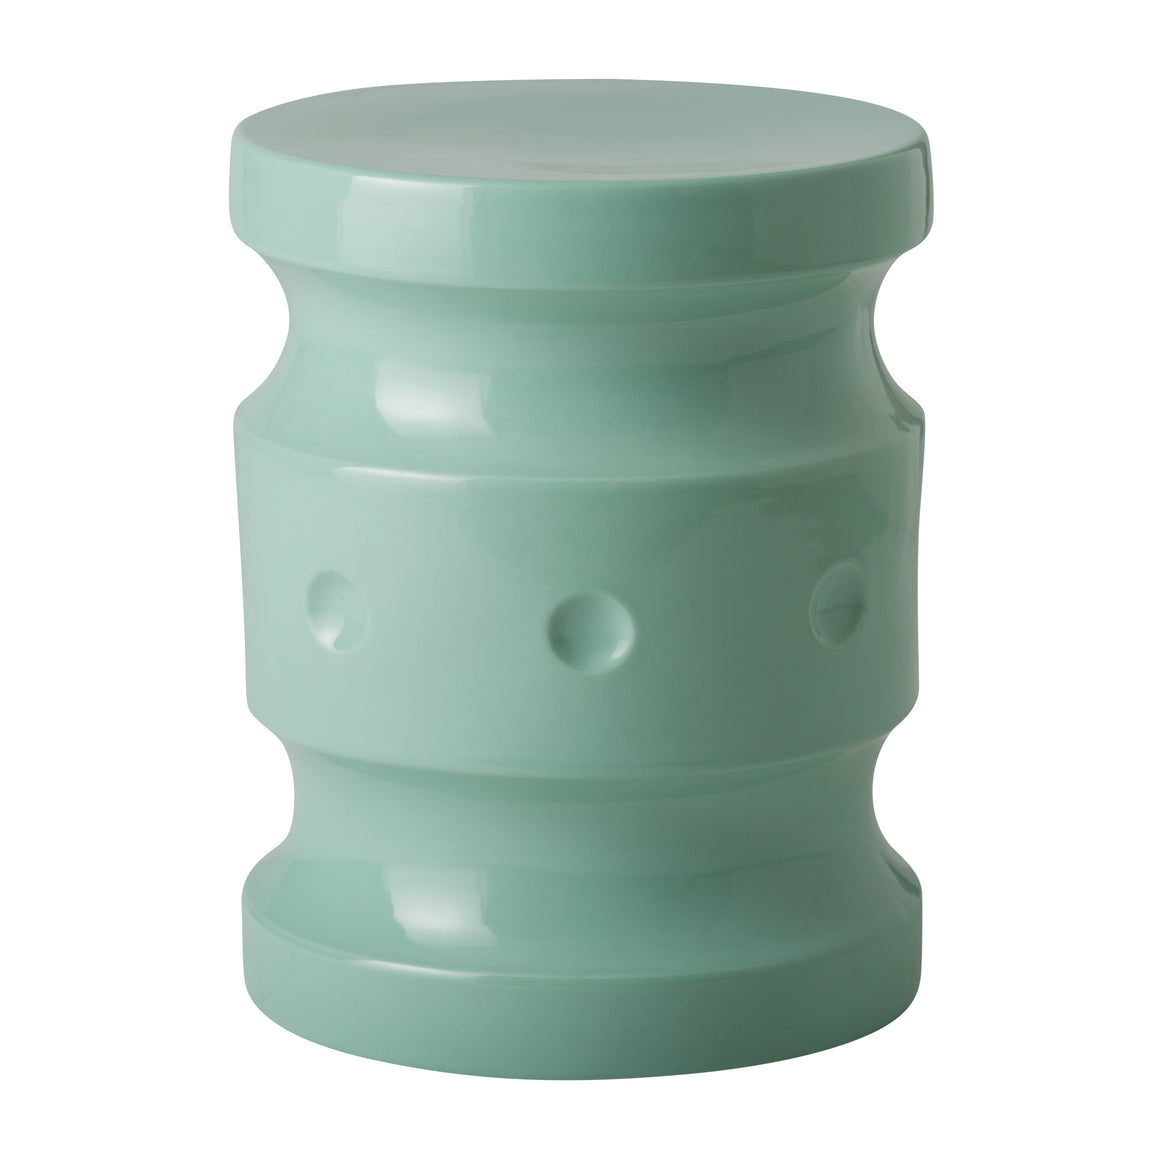 Spindle Garden Stool/Table with a Light Teal Glaze